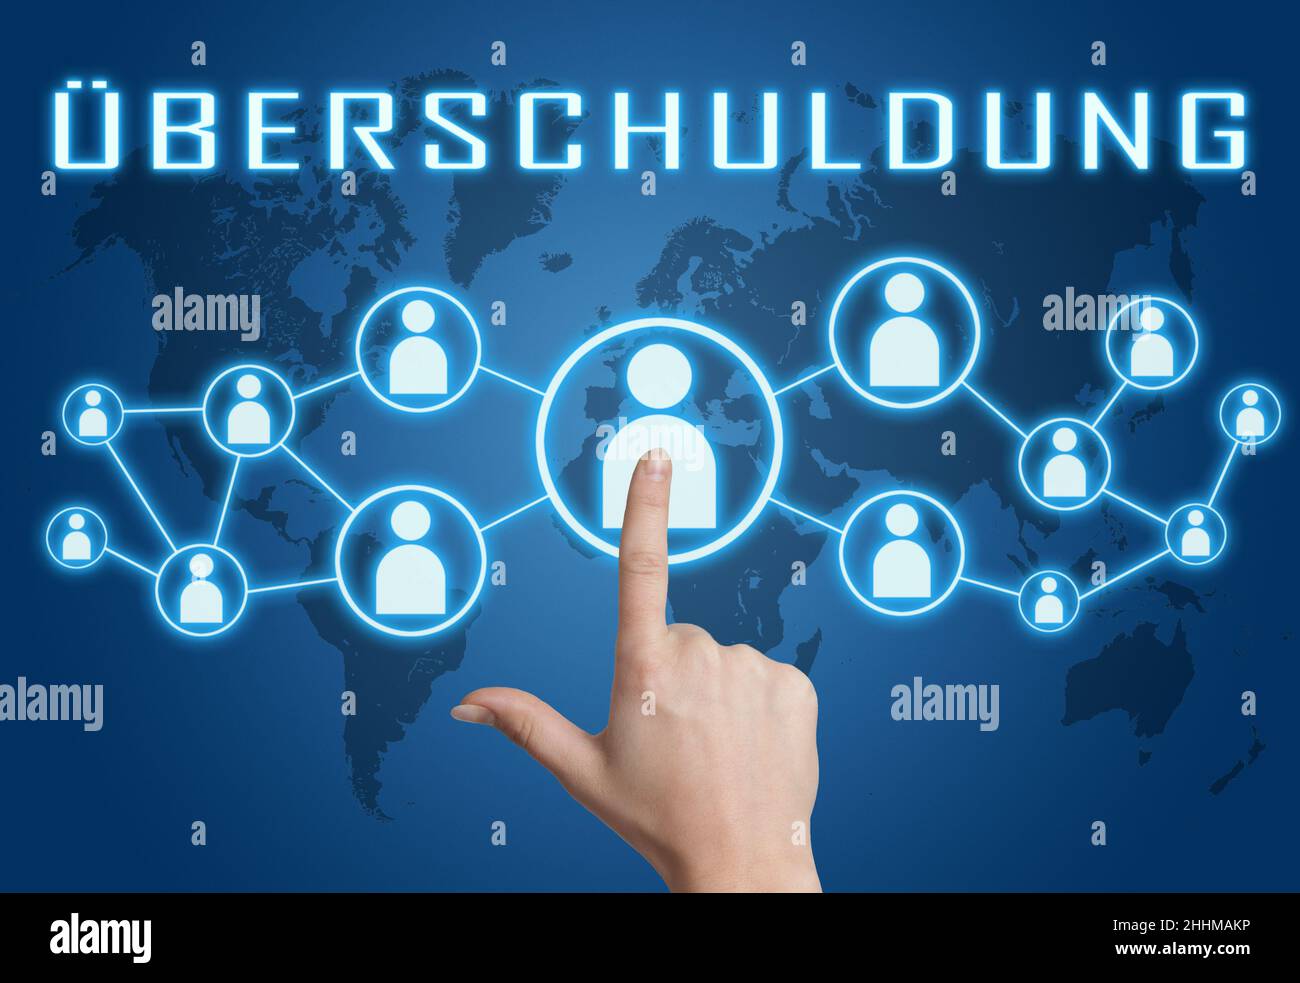 Ueberschuldung - german word for over indebtedness - text concept with hand pressing social icons on blue world map background. Stock Photo